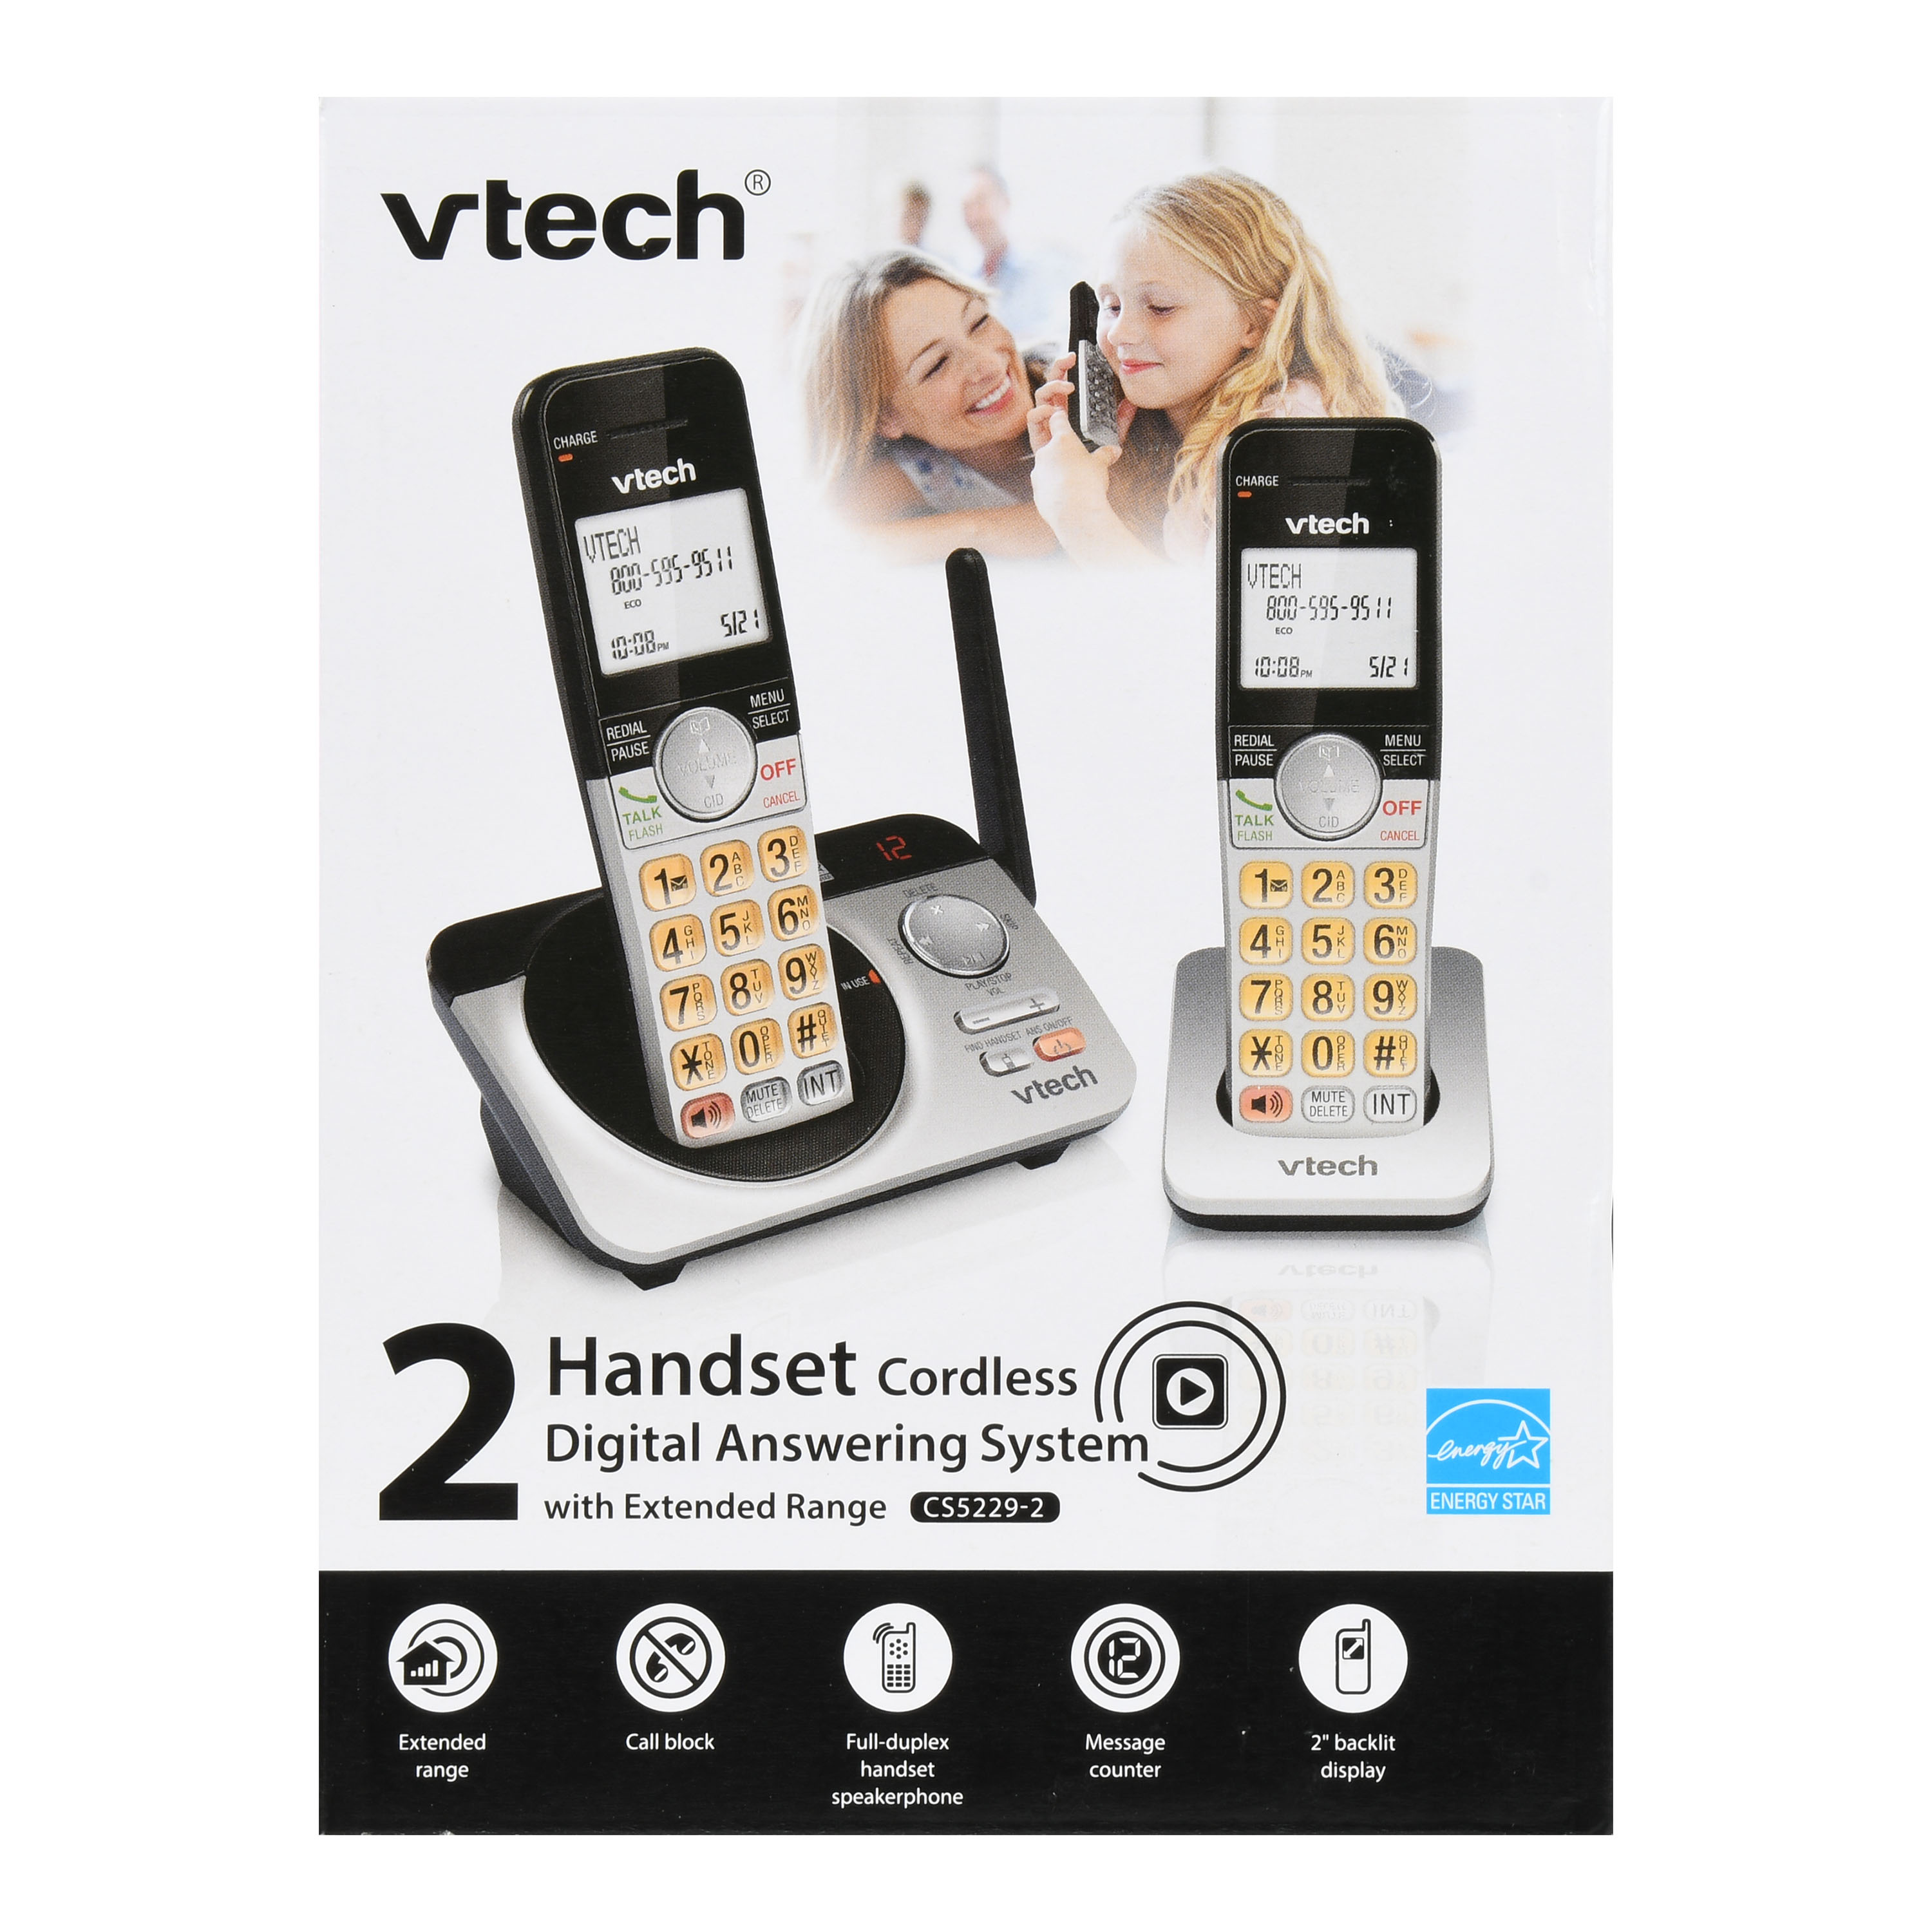 VTech CS5229-2 2 Handset Extended Range DECT 6.0 Cordless Phone with Answering System (Silver/Black) - image 5 of 18